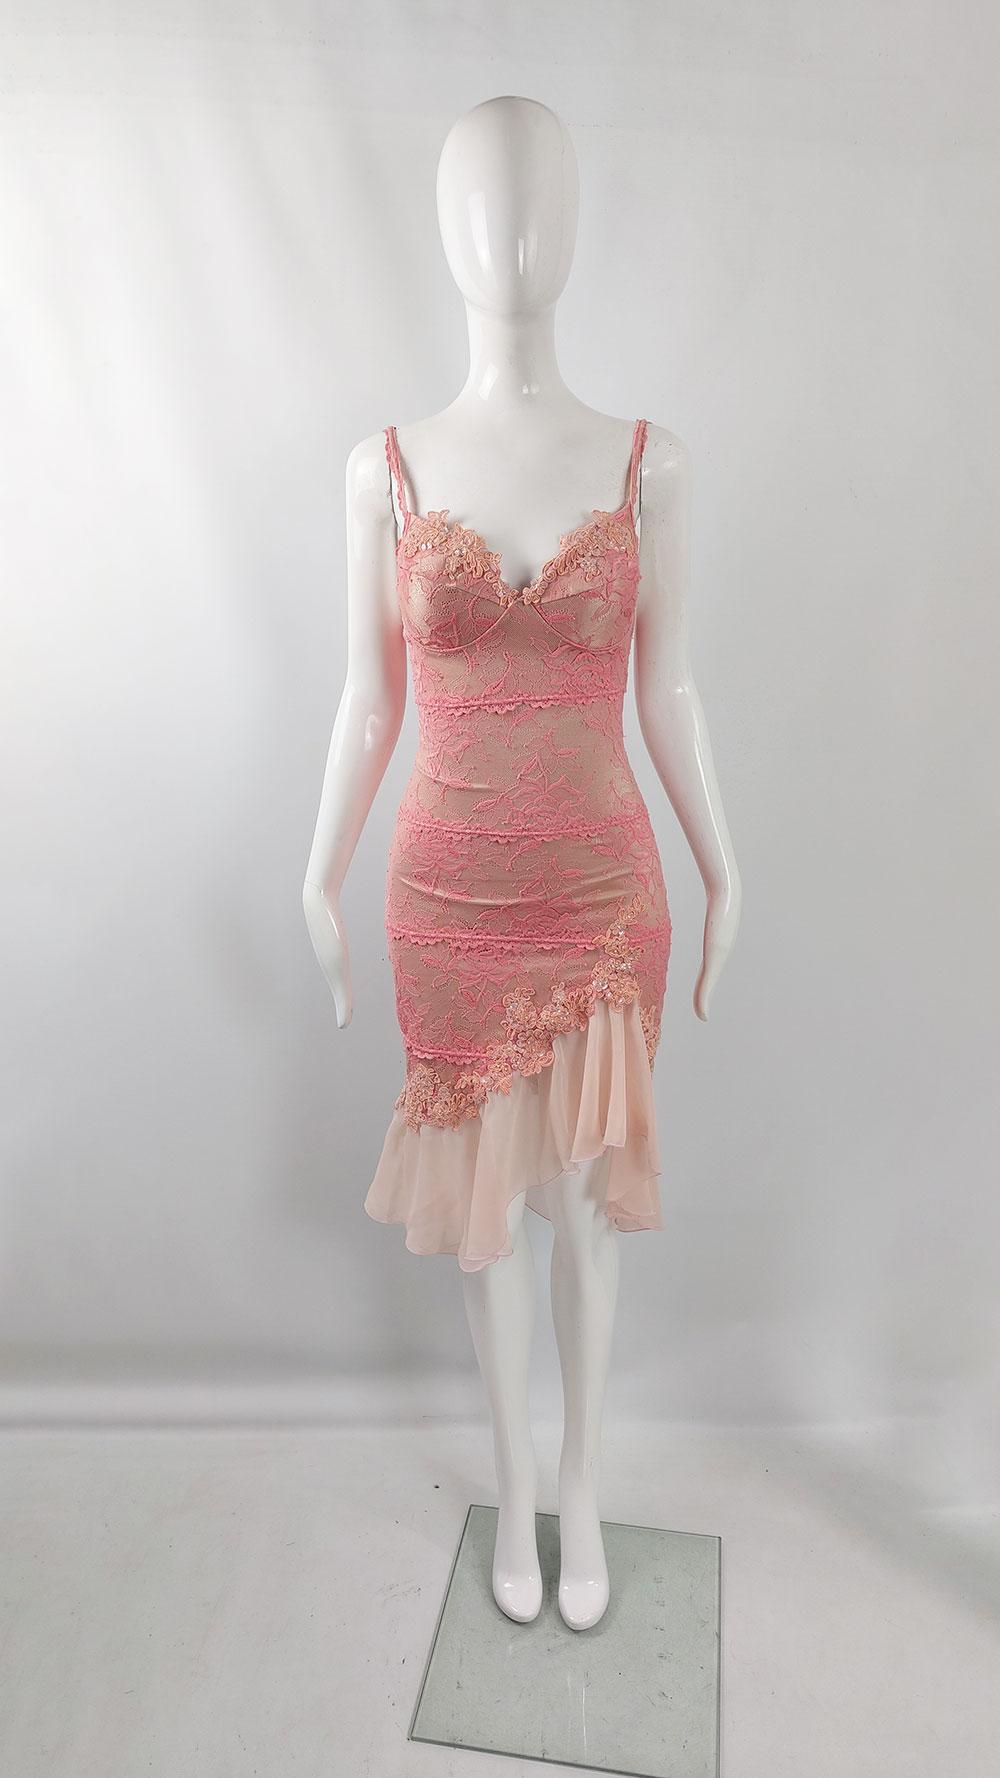 A stunning 2000s vintage women's dress by the iconic British label Catwalk Collection, celebrated for their sultry eveningwear, particularly sensuous and body-conscious dresses like this piece. This dress is crafted from pink lace over flesh-colored